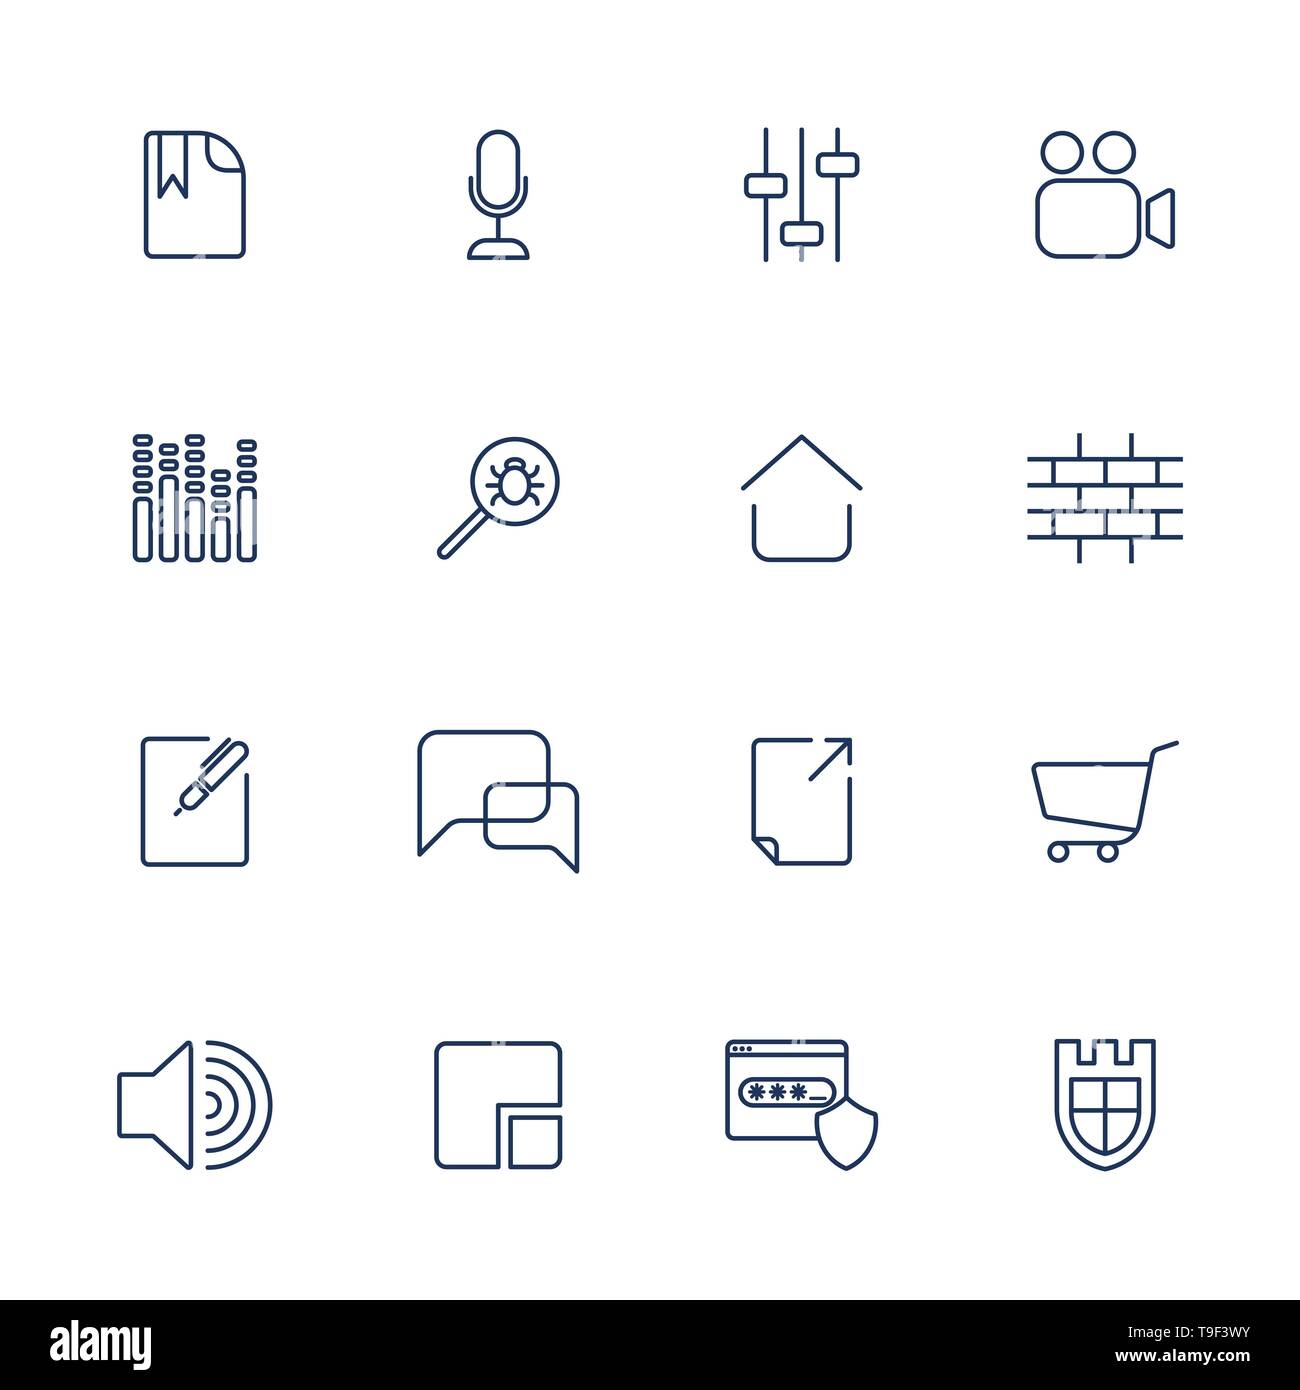 Set of 16 vector icons for software, application or websites - social media and technology Stock Vector